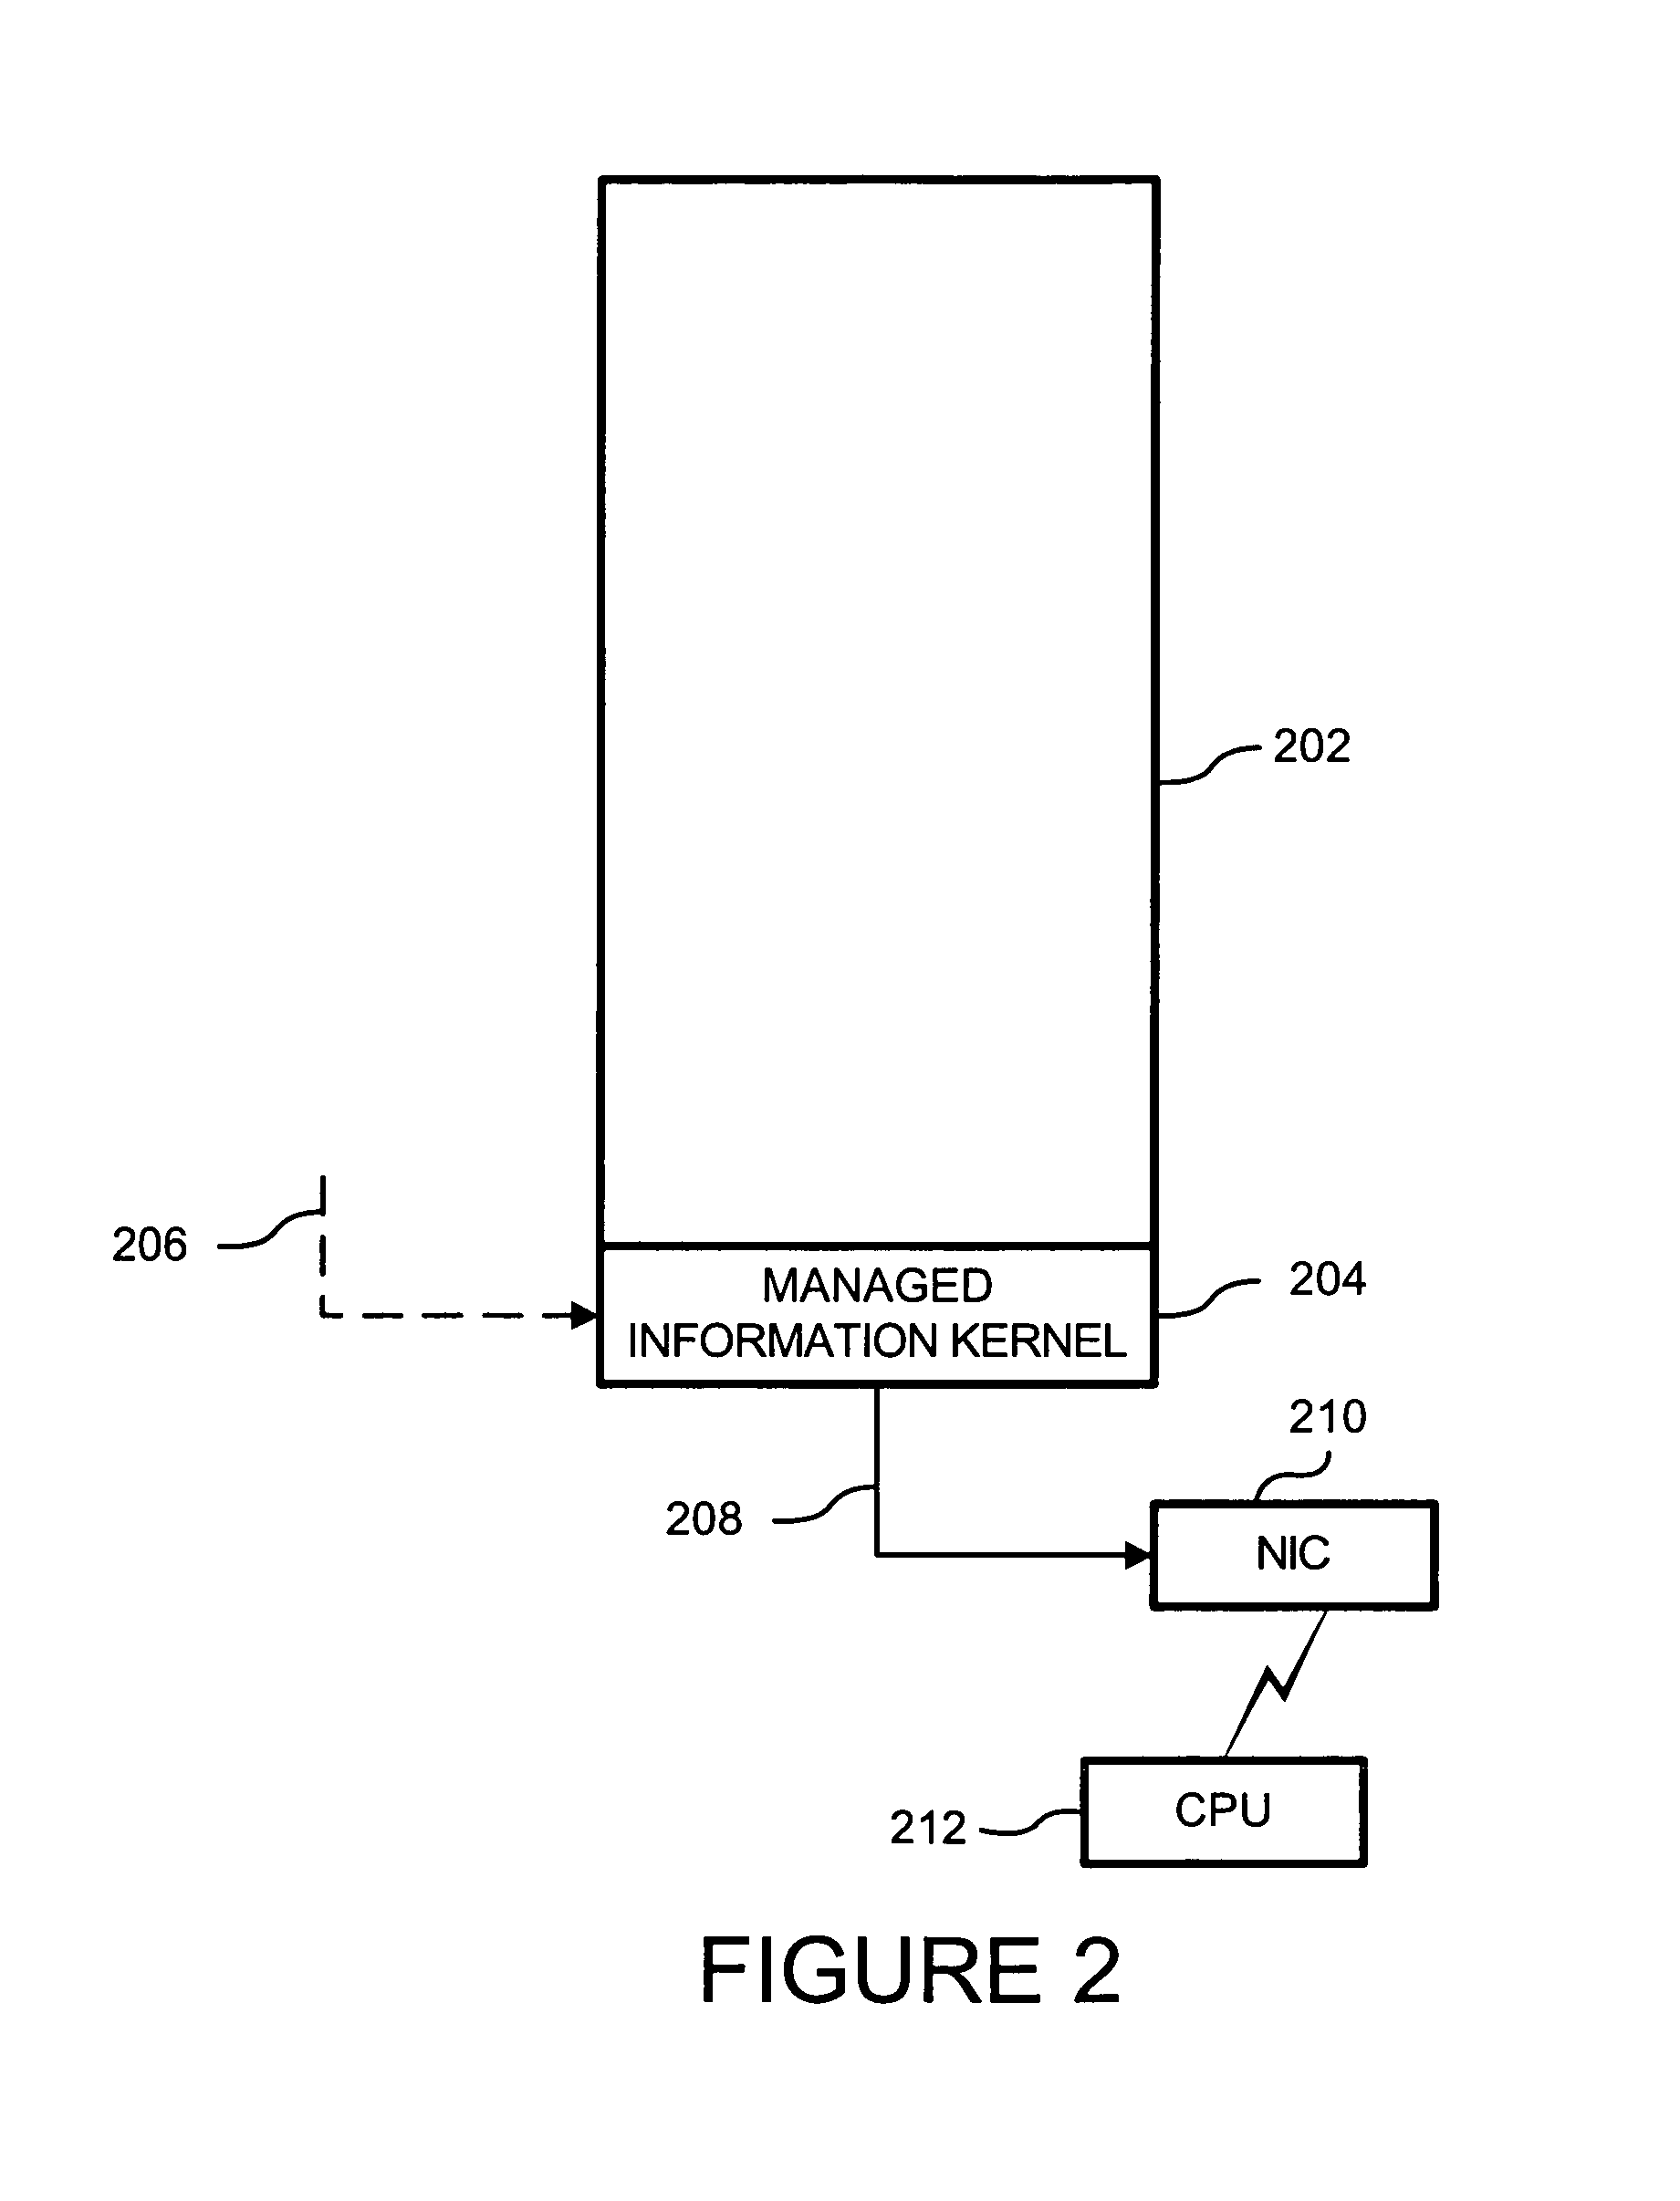 System and method of testing software and hardware in a reconfigurable instrumented network